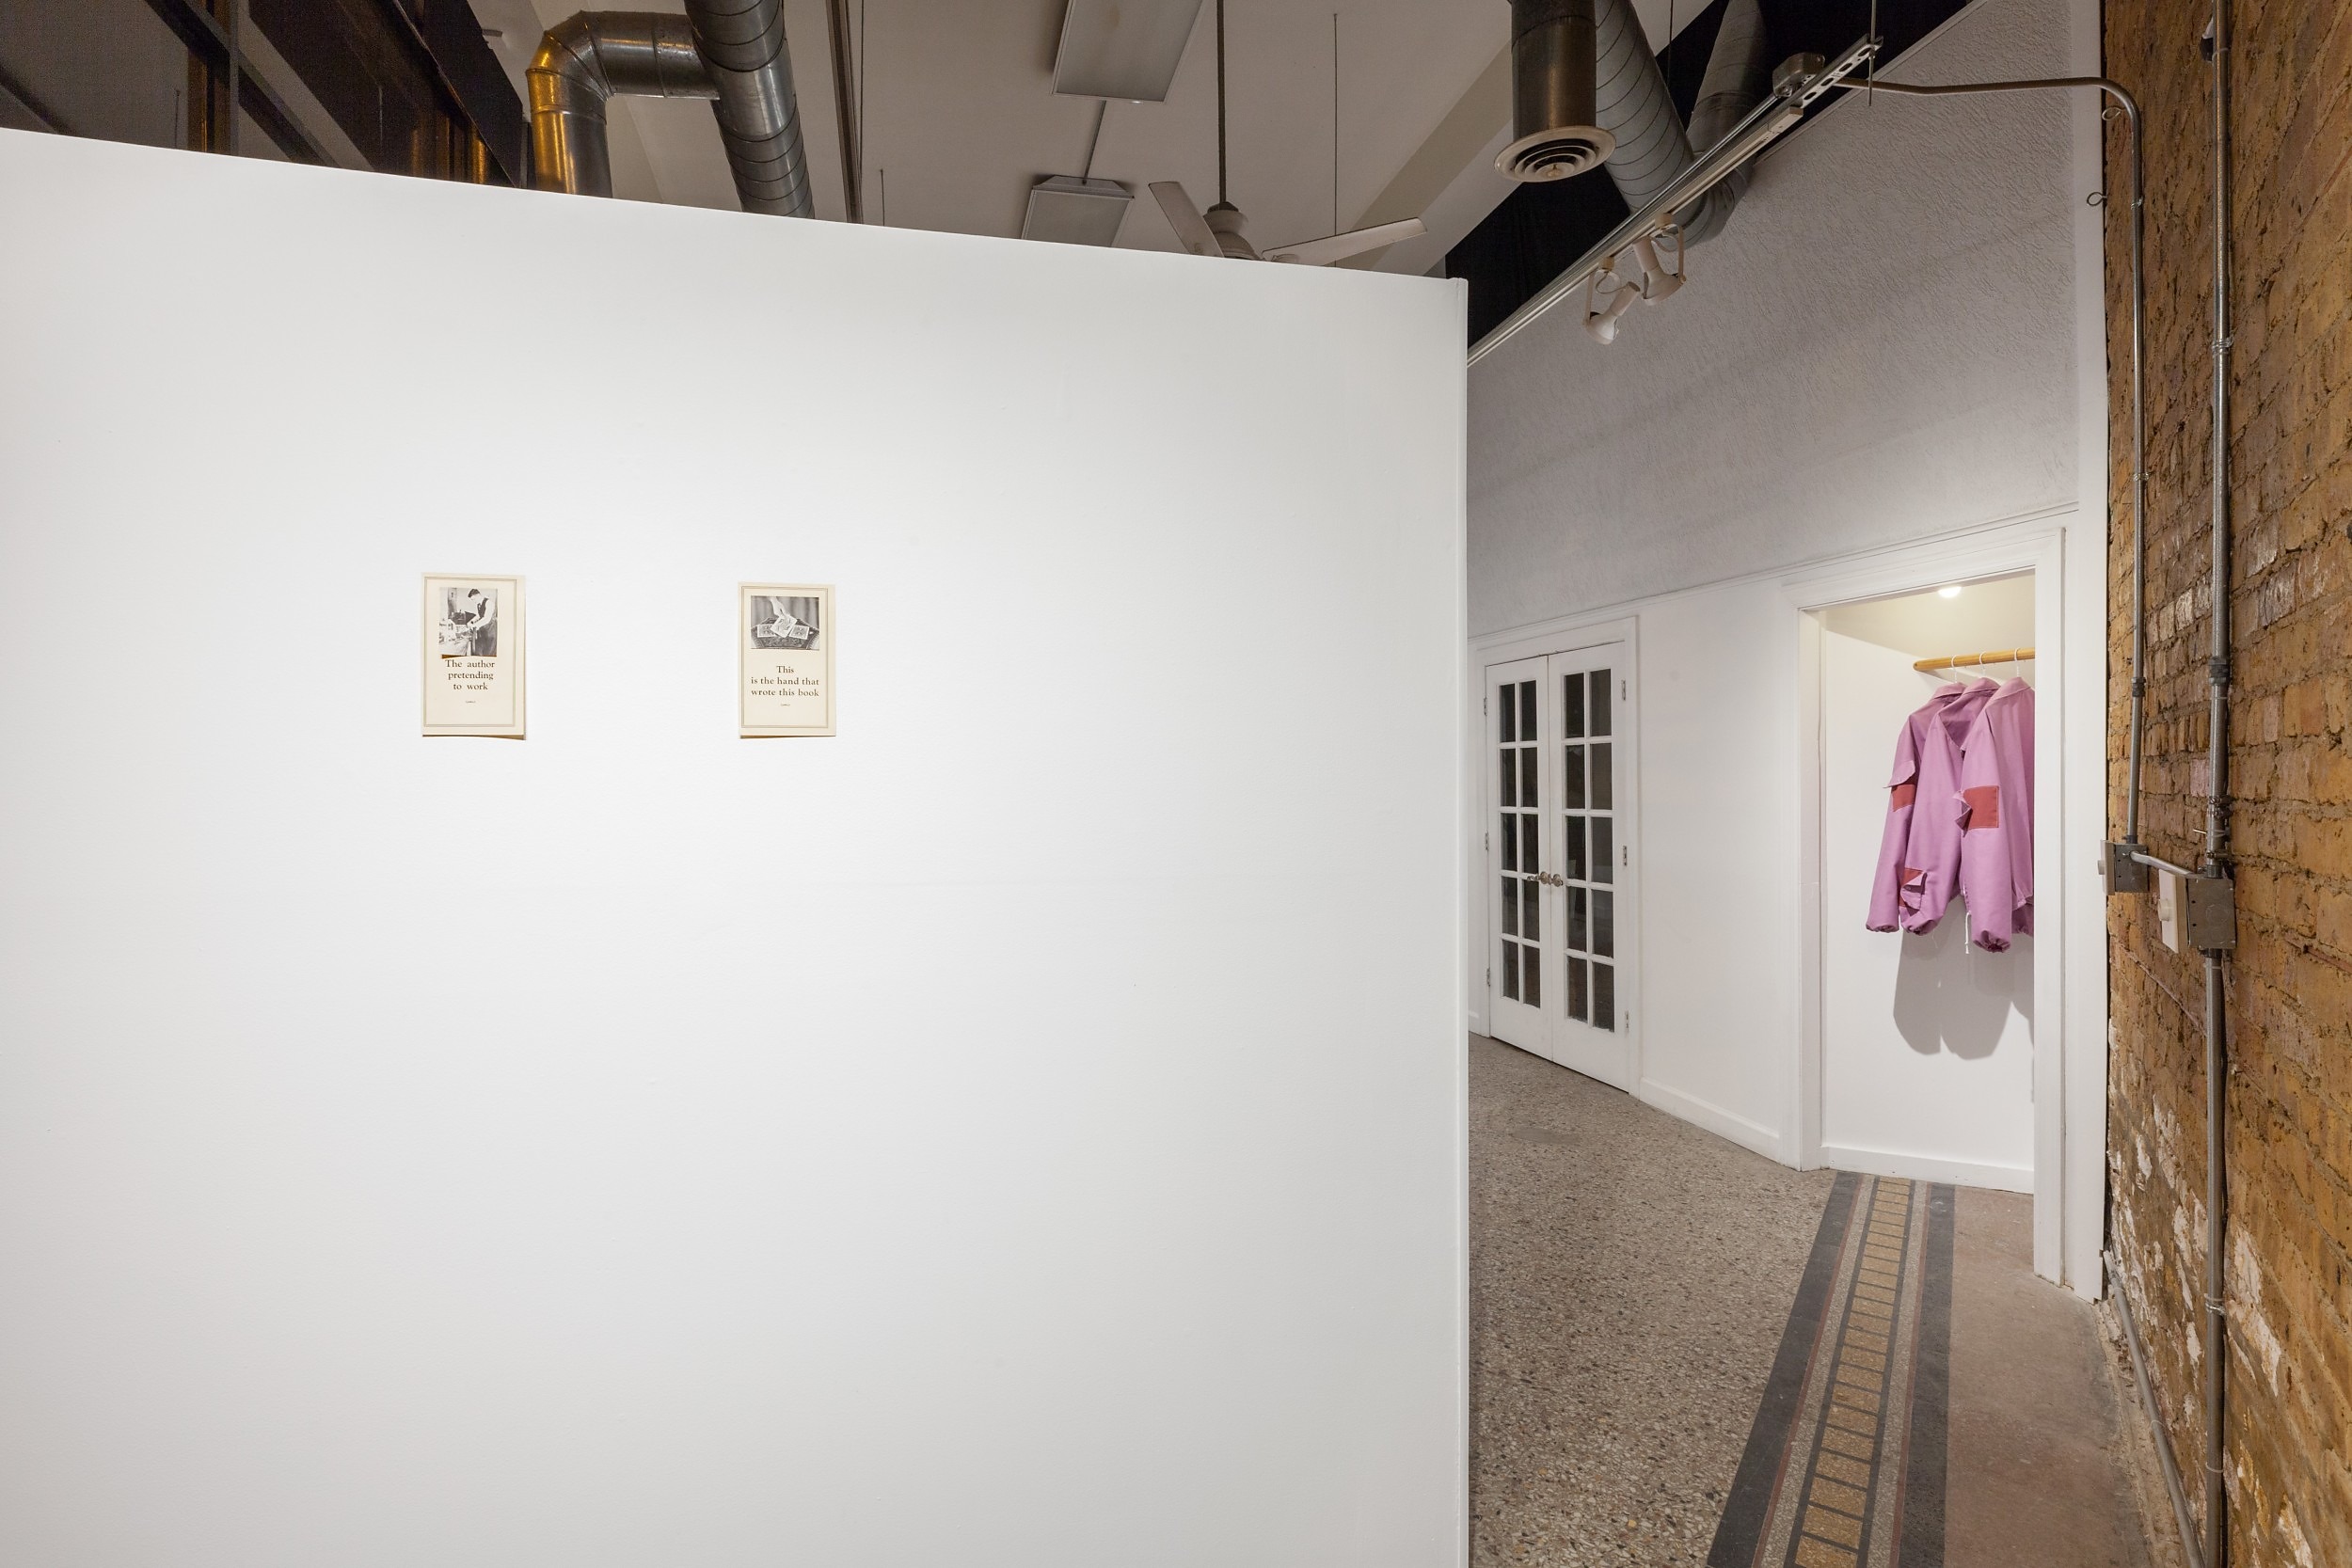 Dan Miller and Aaron Walker, Handkerchiefs and Flowers, 2018
Installation view, Roots & Culture, Chicago, IL, April–May 2018